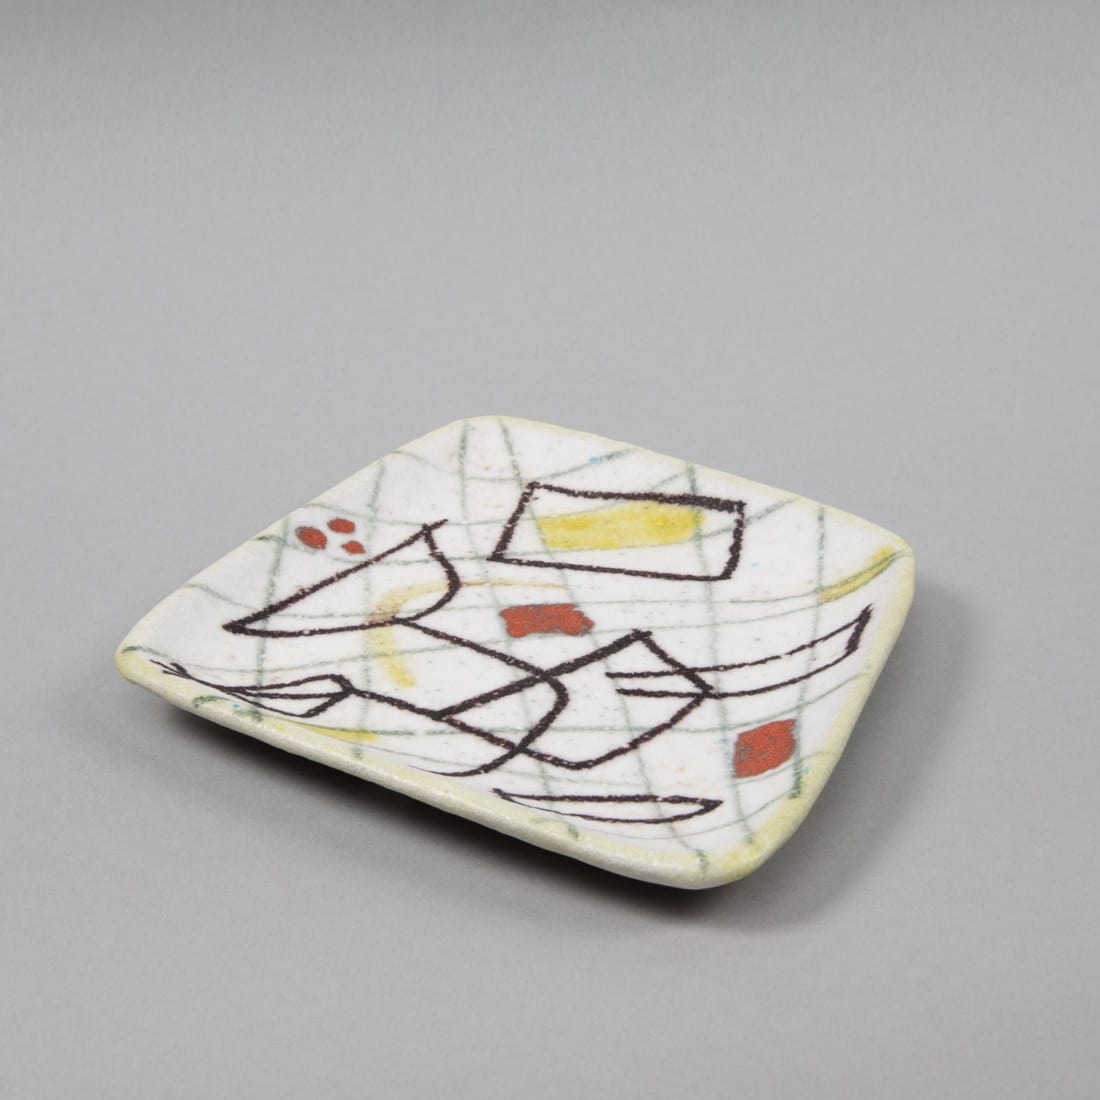 Freeform ceramic plate with abstract decor by Guido Gambone -img04